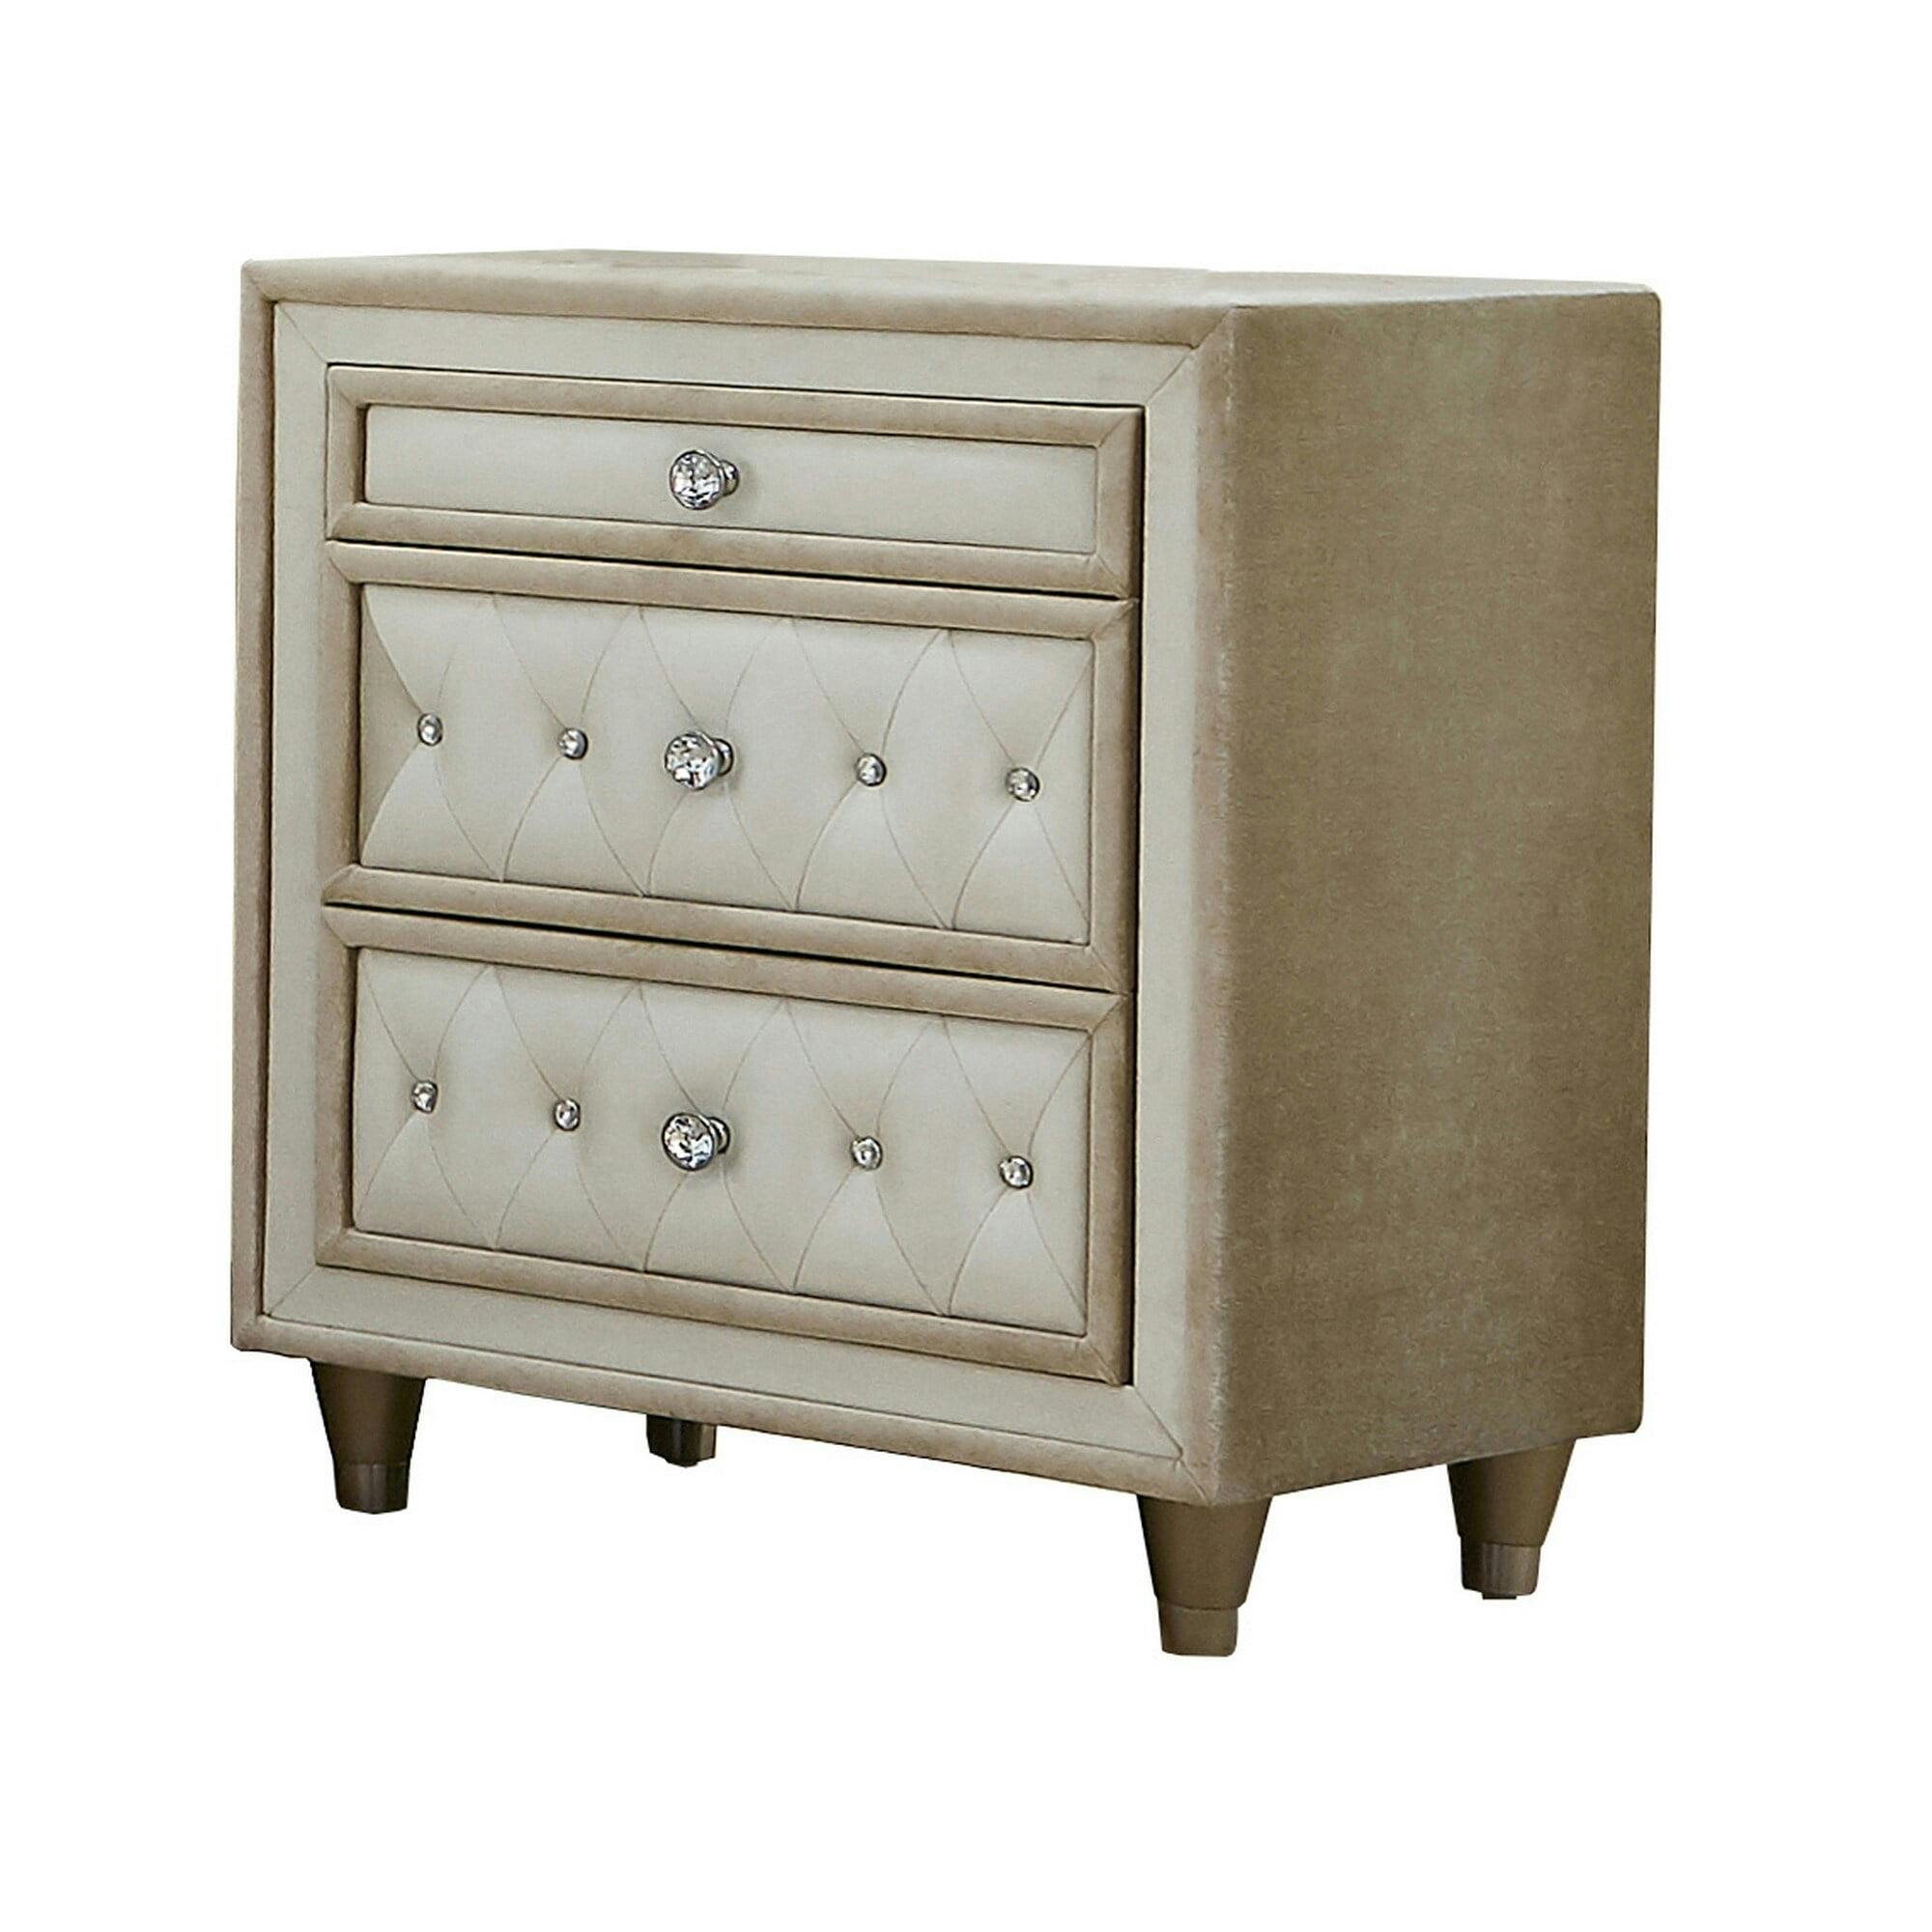 Vintage Charm Velvet-Tufted Nightstand with USB Ports, Light Brown